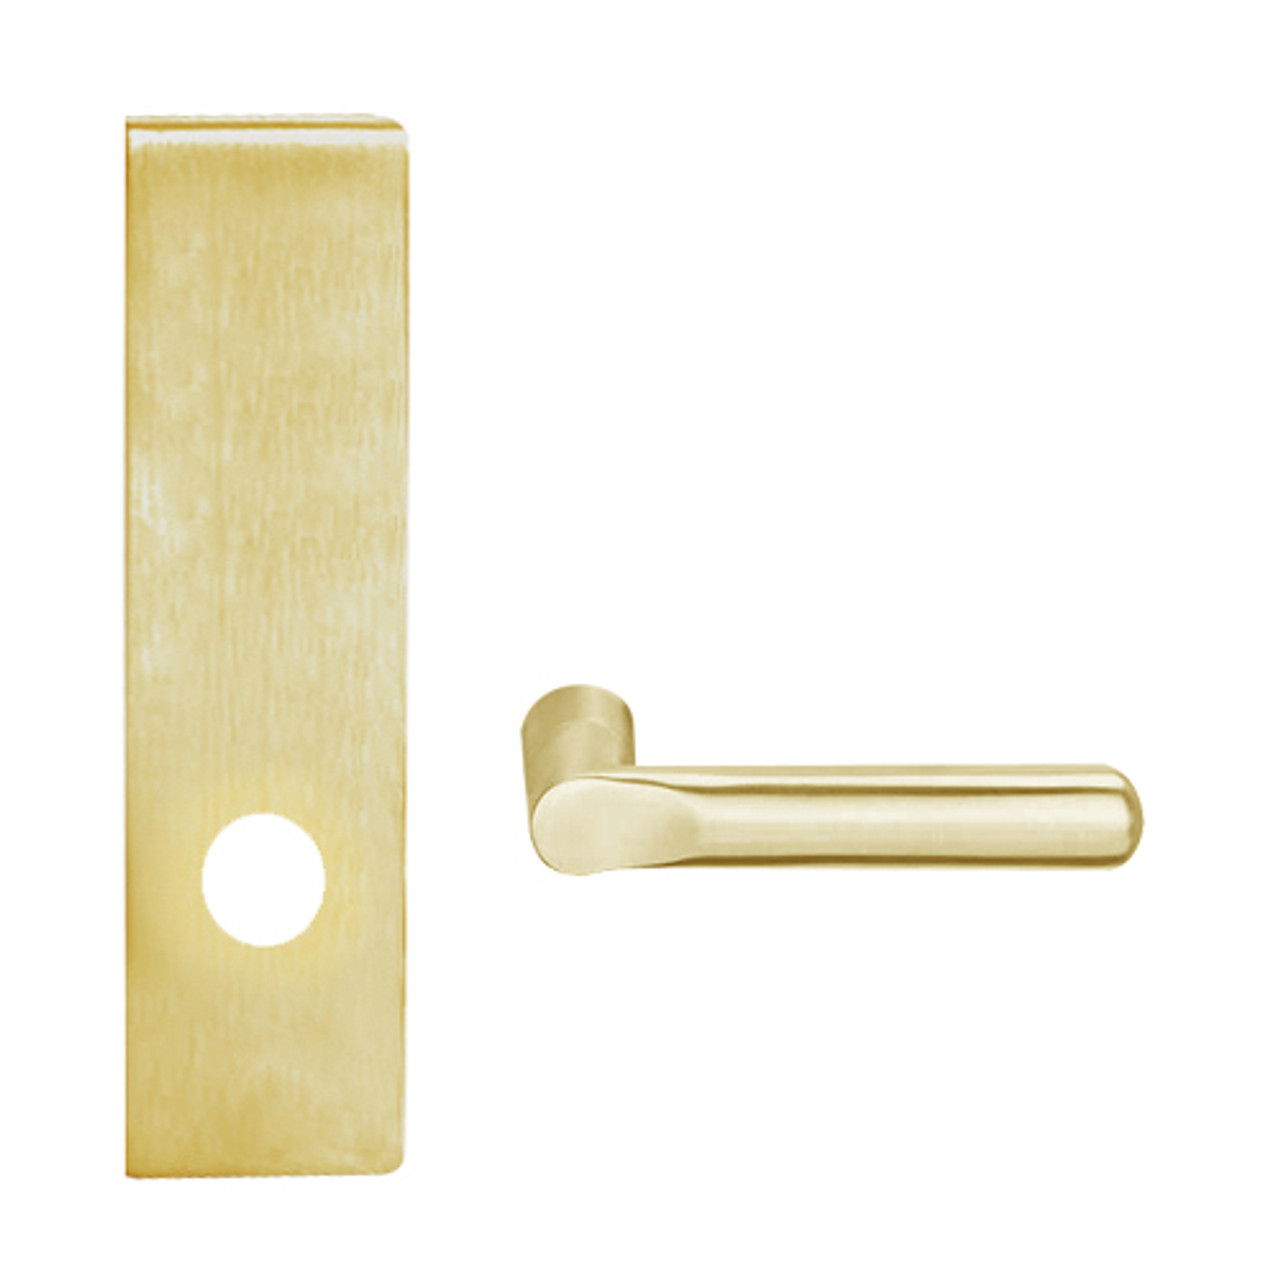 L9025-18N-606 Schlage L Series Exit Commercial Mortise Lock with 18 Cast Lever Design in Satin Brass